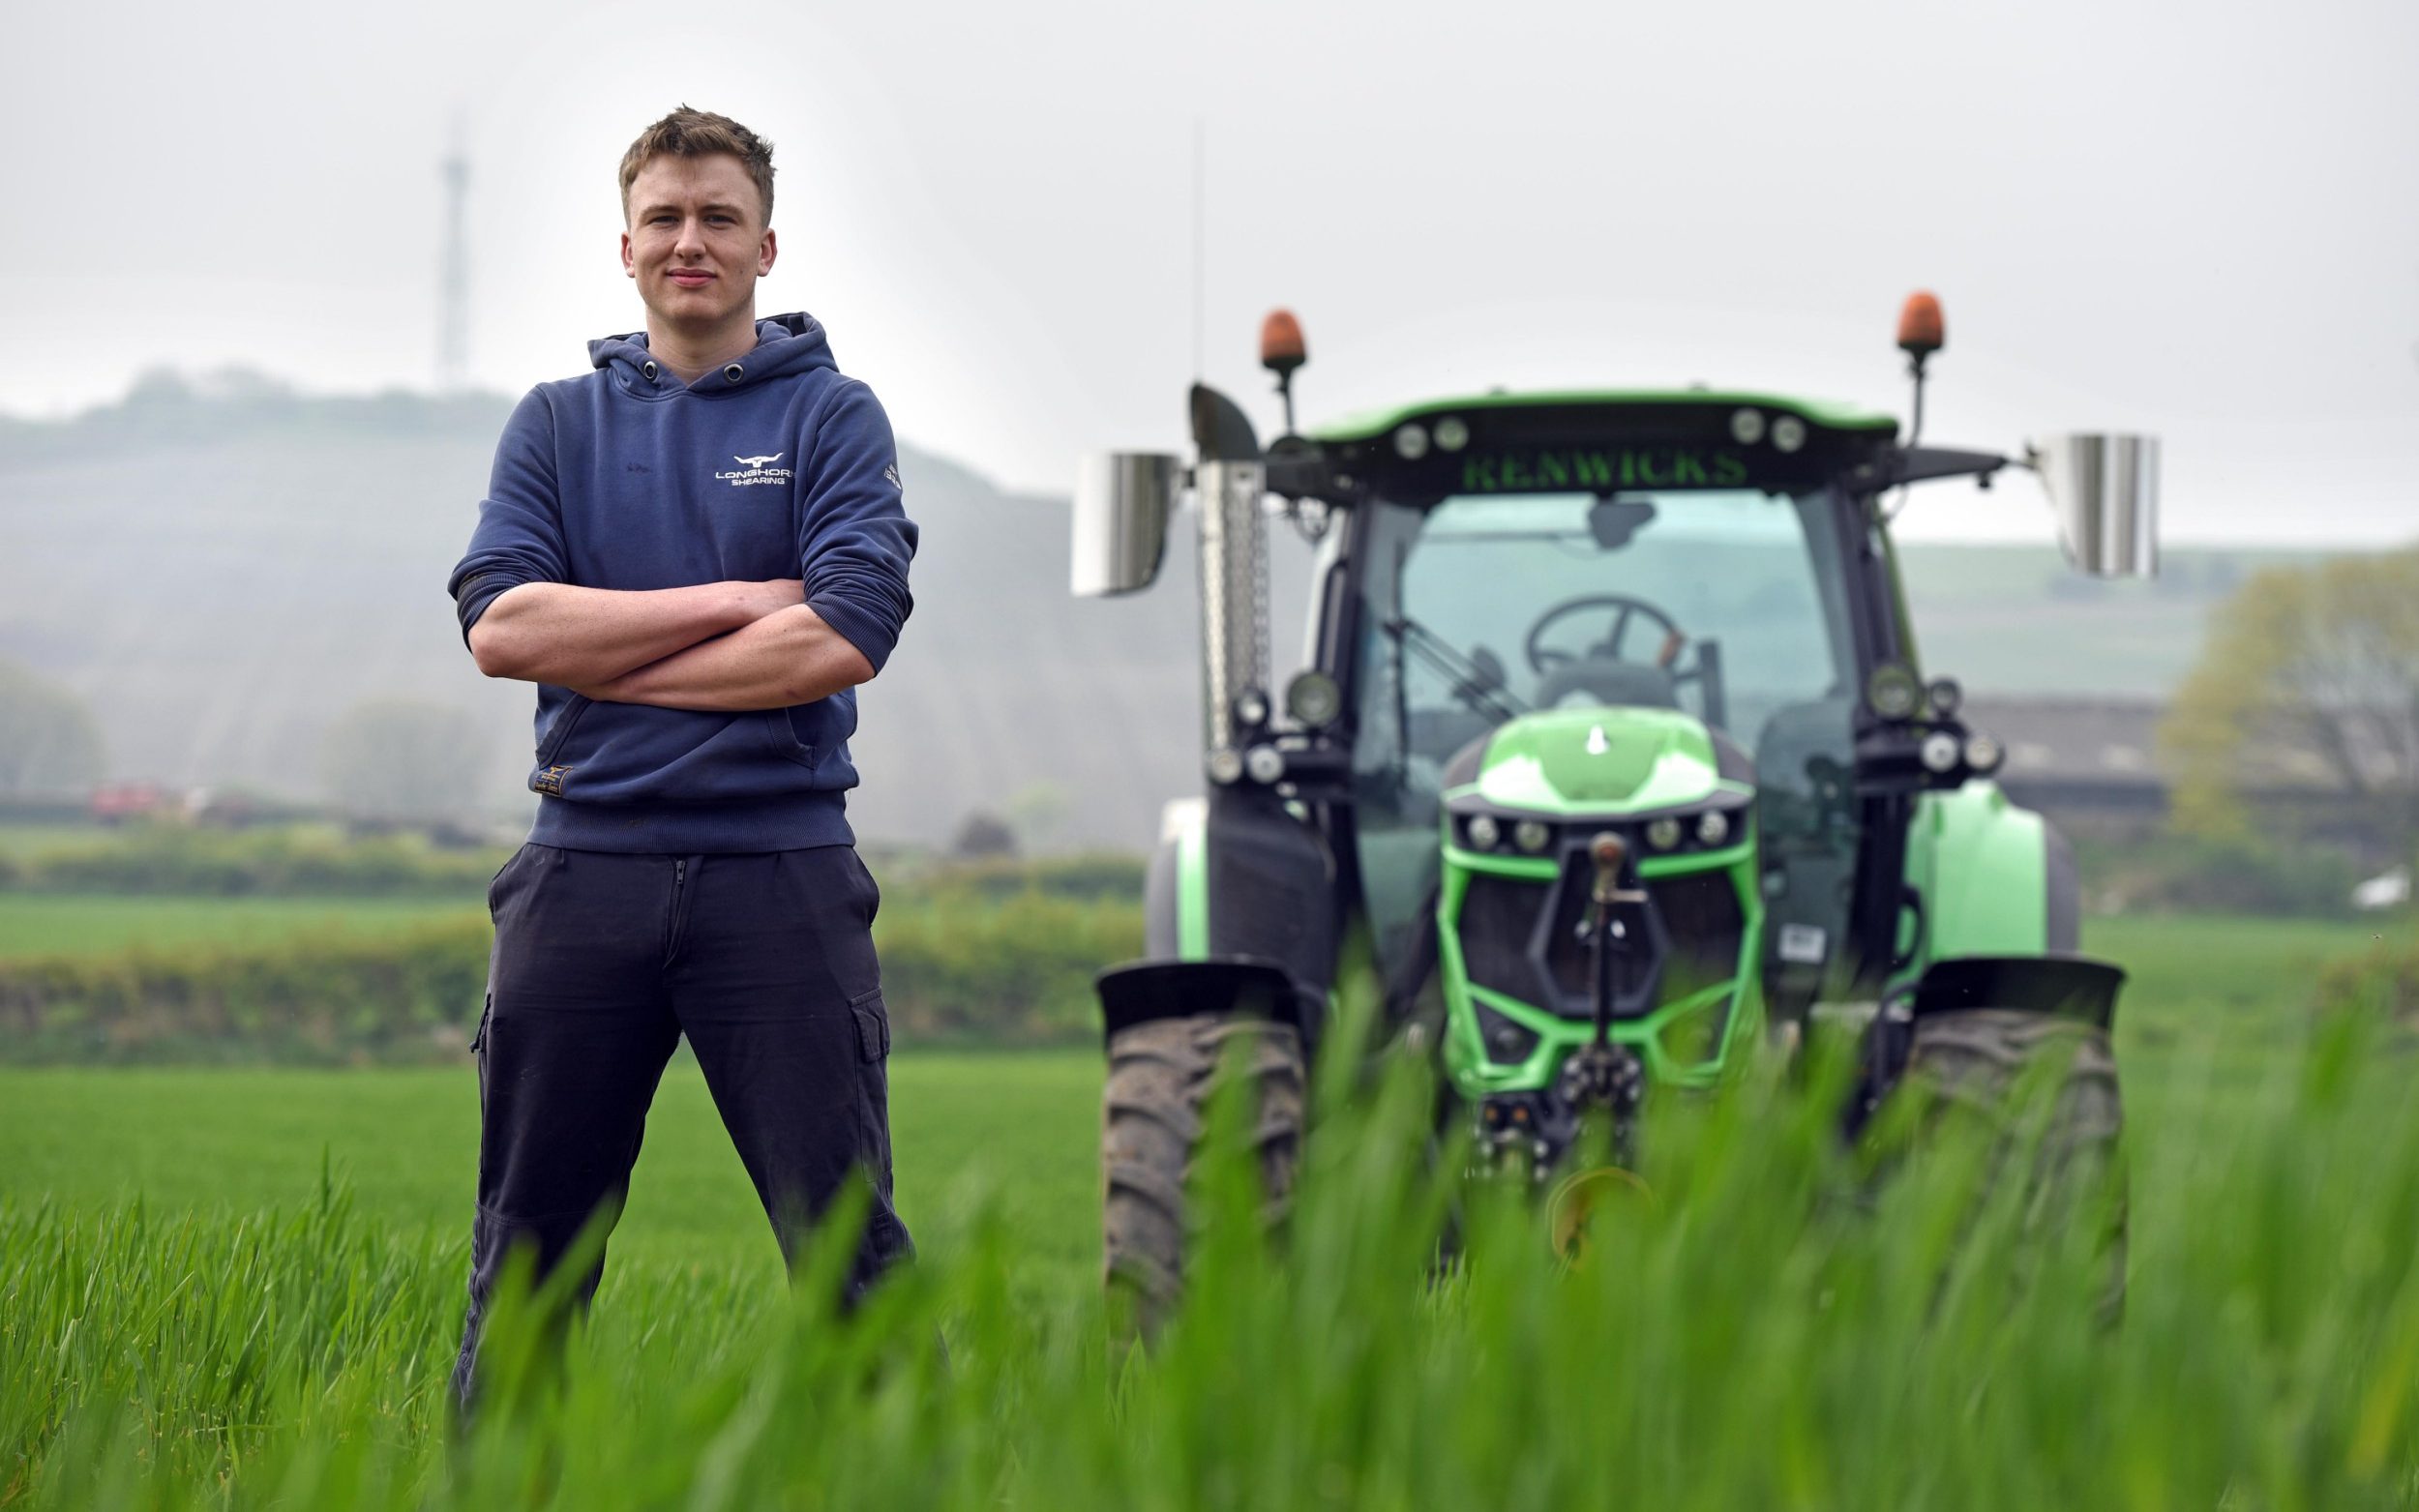 amazon, ‘i get paid £12 an hour and drive a £300k tractor’